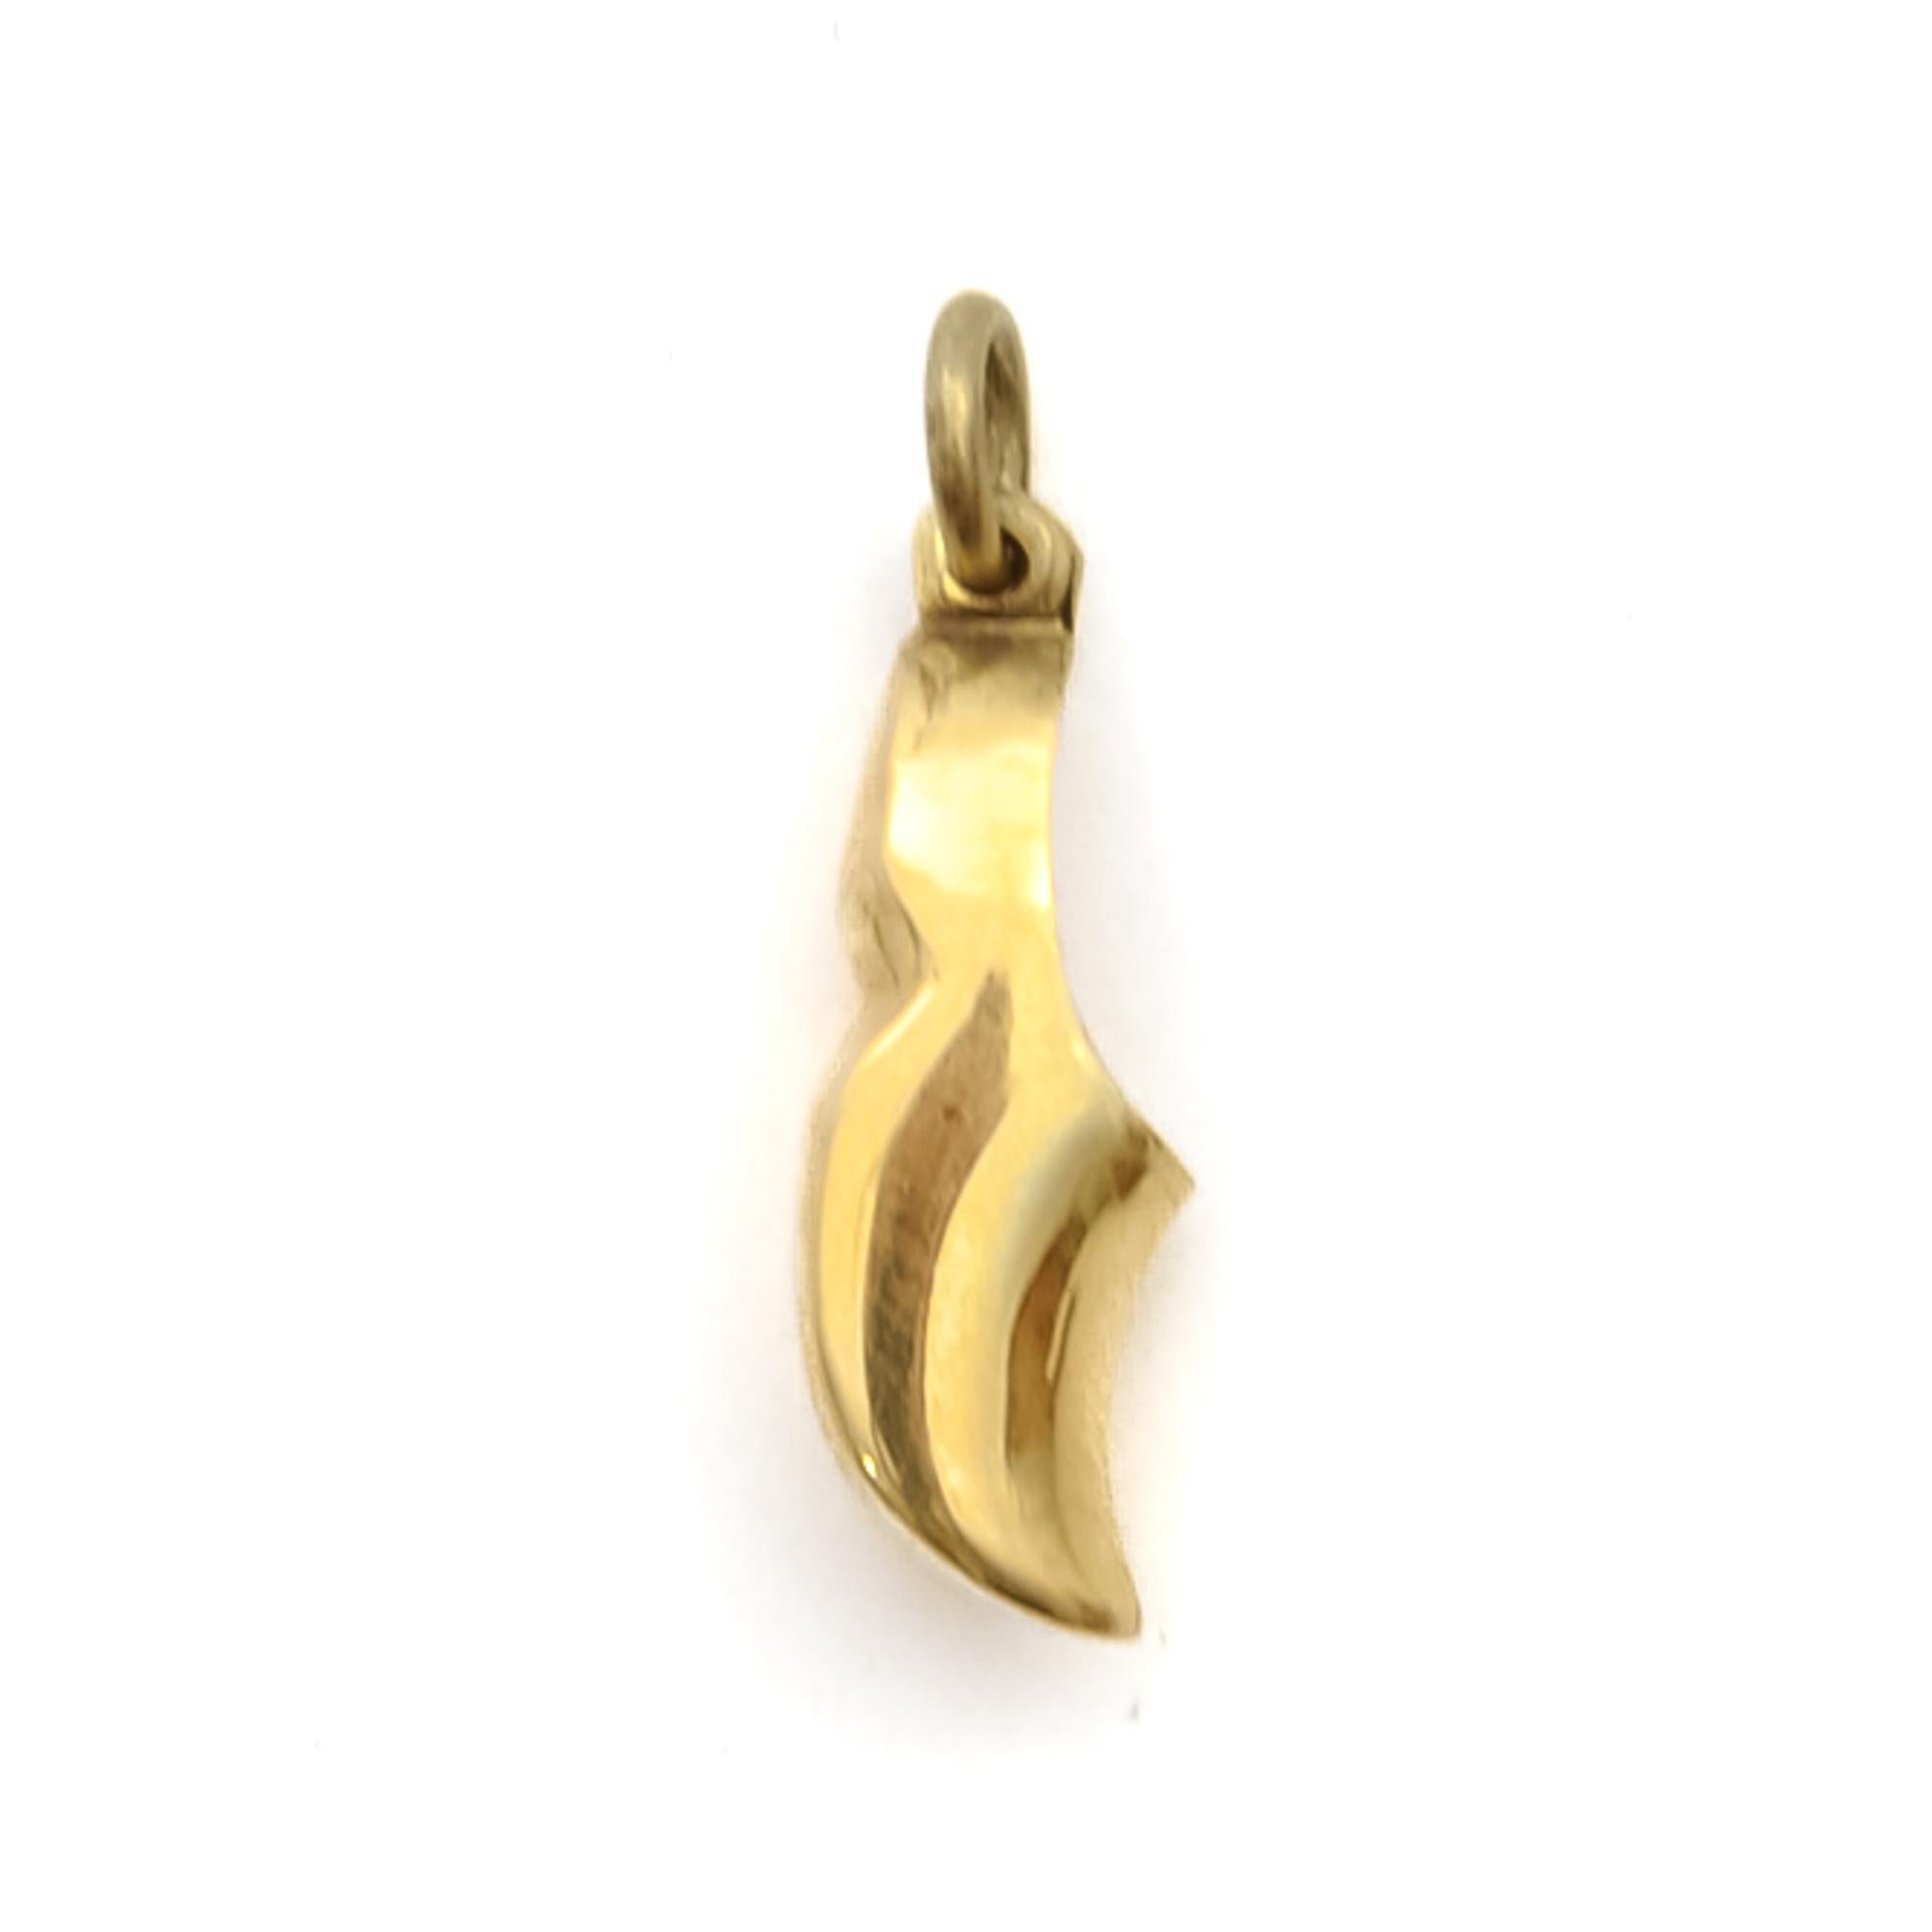 A beautiful vintage three-dimensional Dutch wooden shoe clog charm pendant. The clog is nicely polished and created in 14 karat yellow gold. The Netherlands is the country of tulips, windmills and clogs. These Dutch icons, are ideal footwear for the